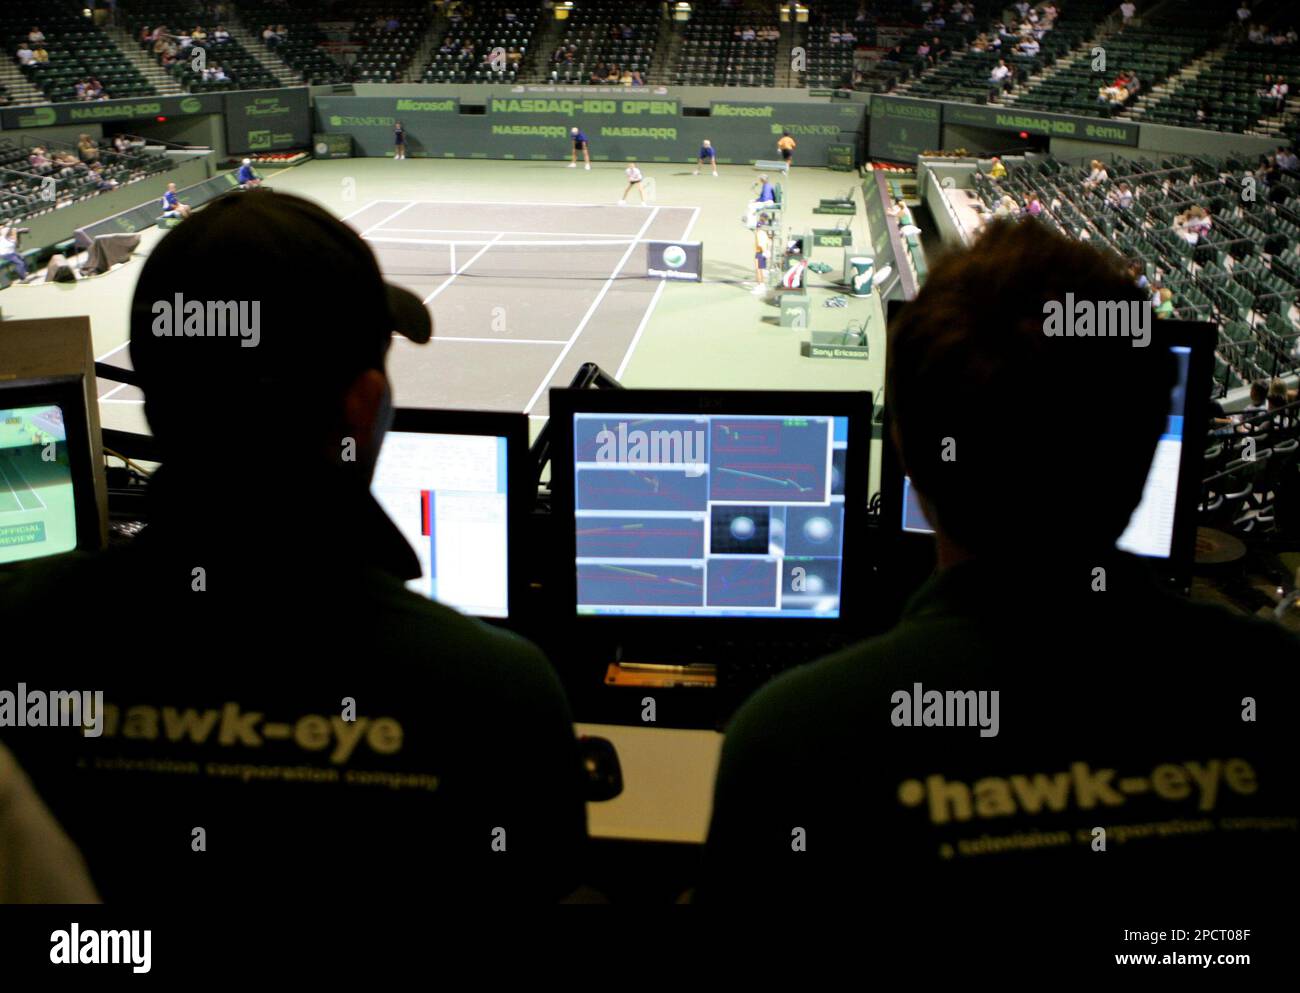 FILE ** Technicians with the Hawk-Eye electronic system monitor computer screens used in instant replay at the Nasdaq 100 Open tennis tournament in Key Biscayne, Fla., in this March 22, 2006